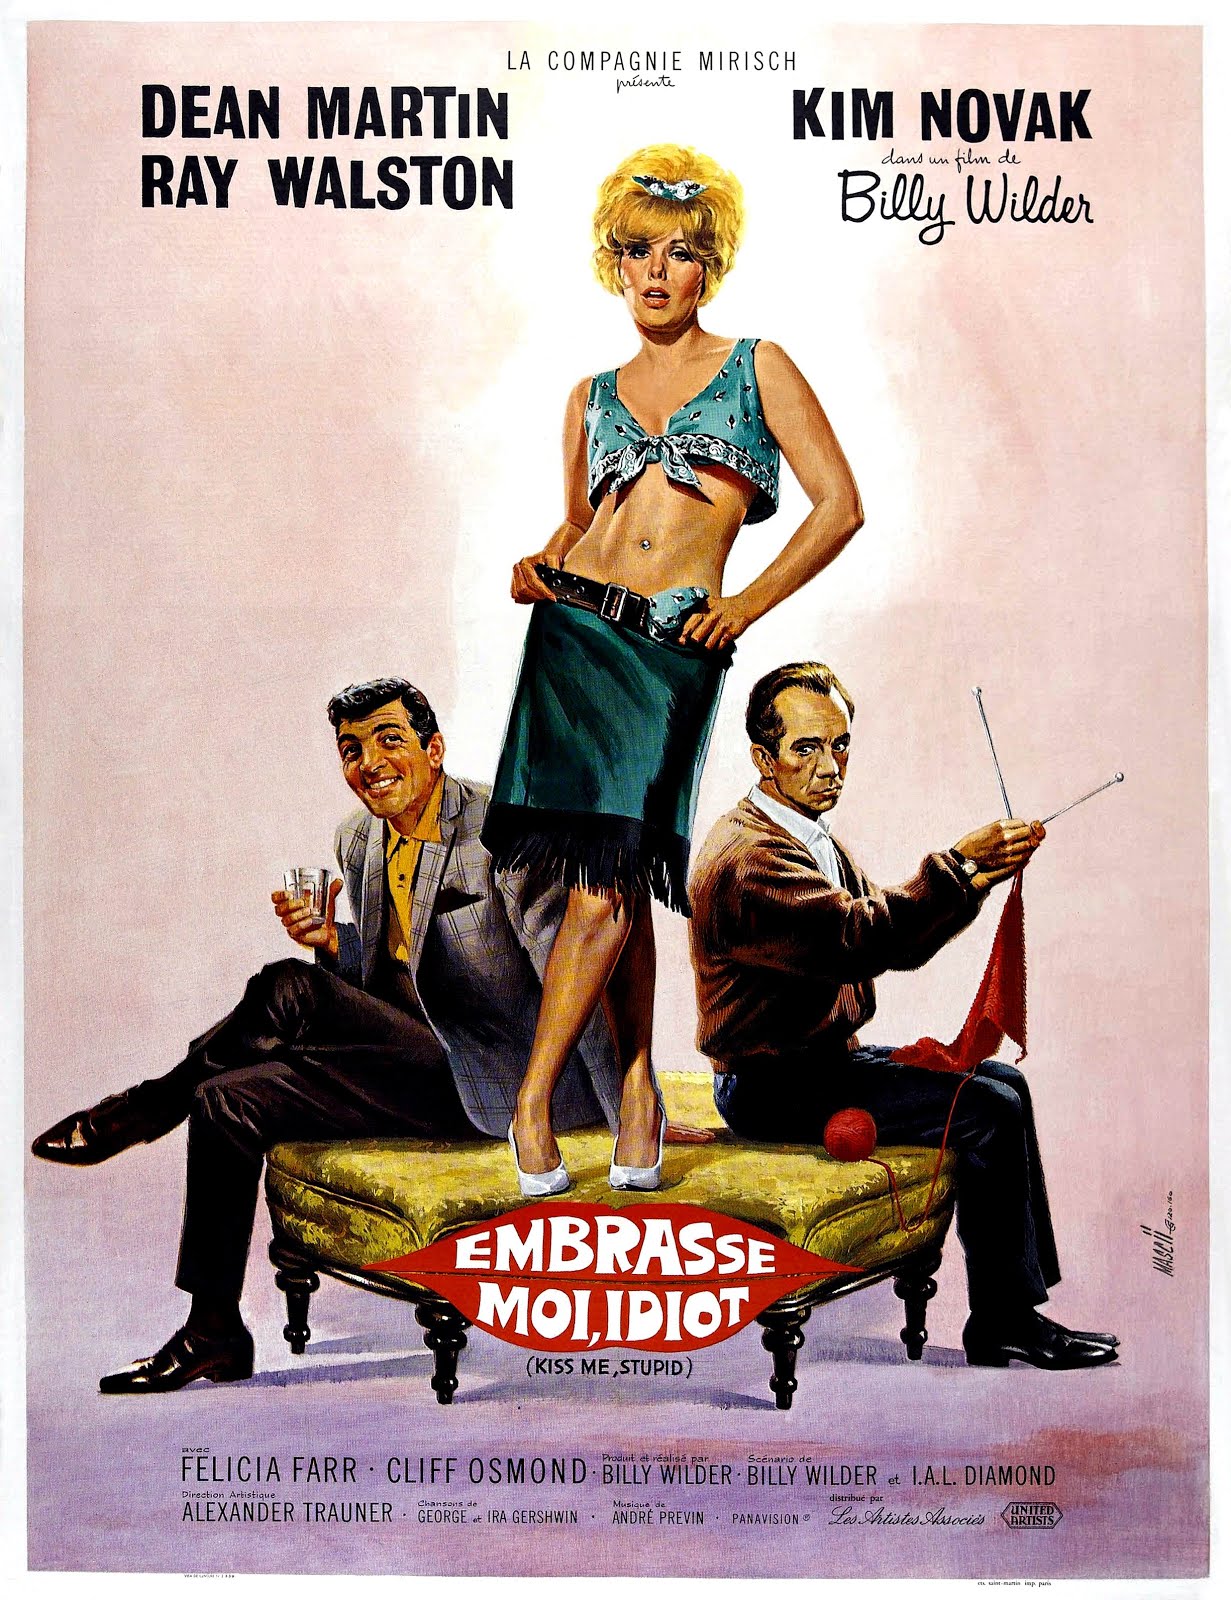 Embrasse moi , idiot (1964) Billy Wilder - Kiss me , stupid (06.03.1964 / 18.06.1964)